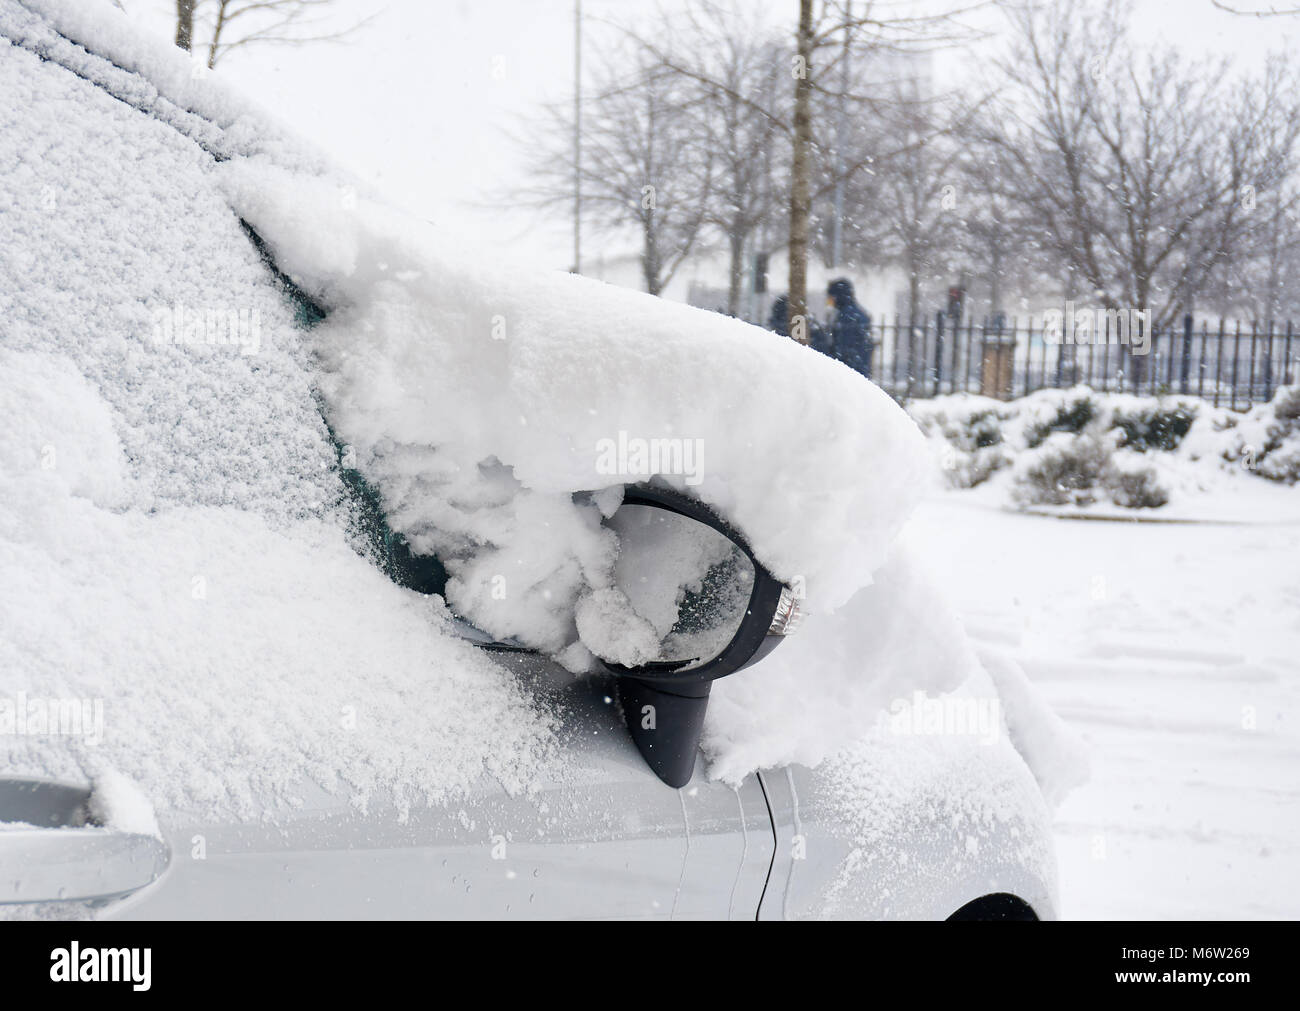 Parked car covere in thick snow following a heavy overnight snowfall due to 'the best from the east' cold front, Glasgow, scotland, UK Stock Photo